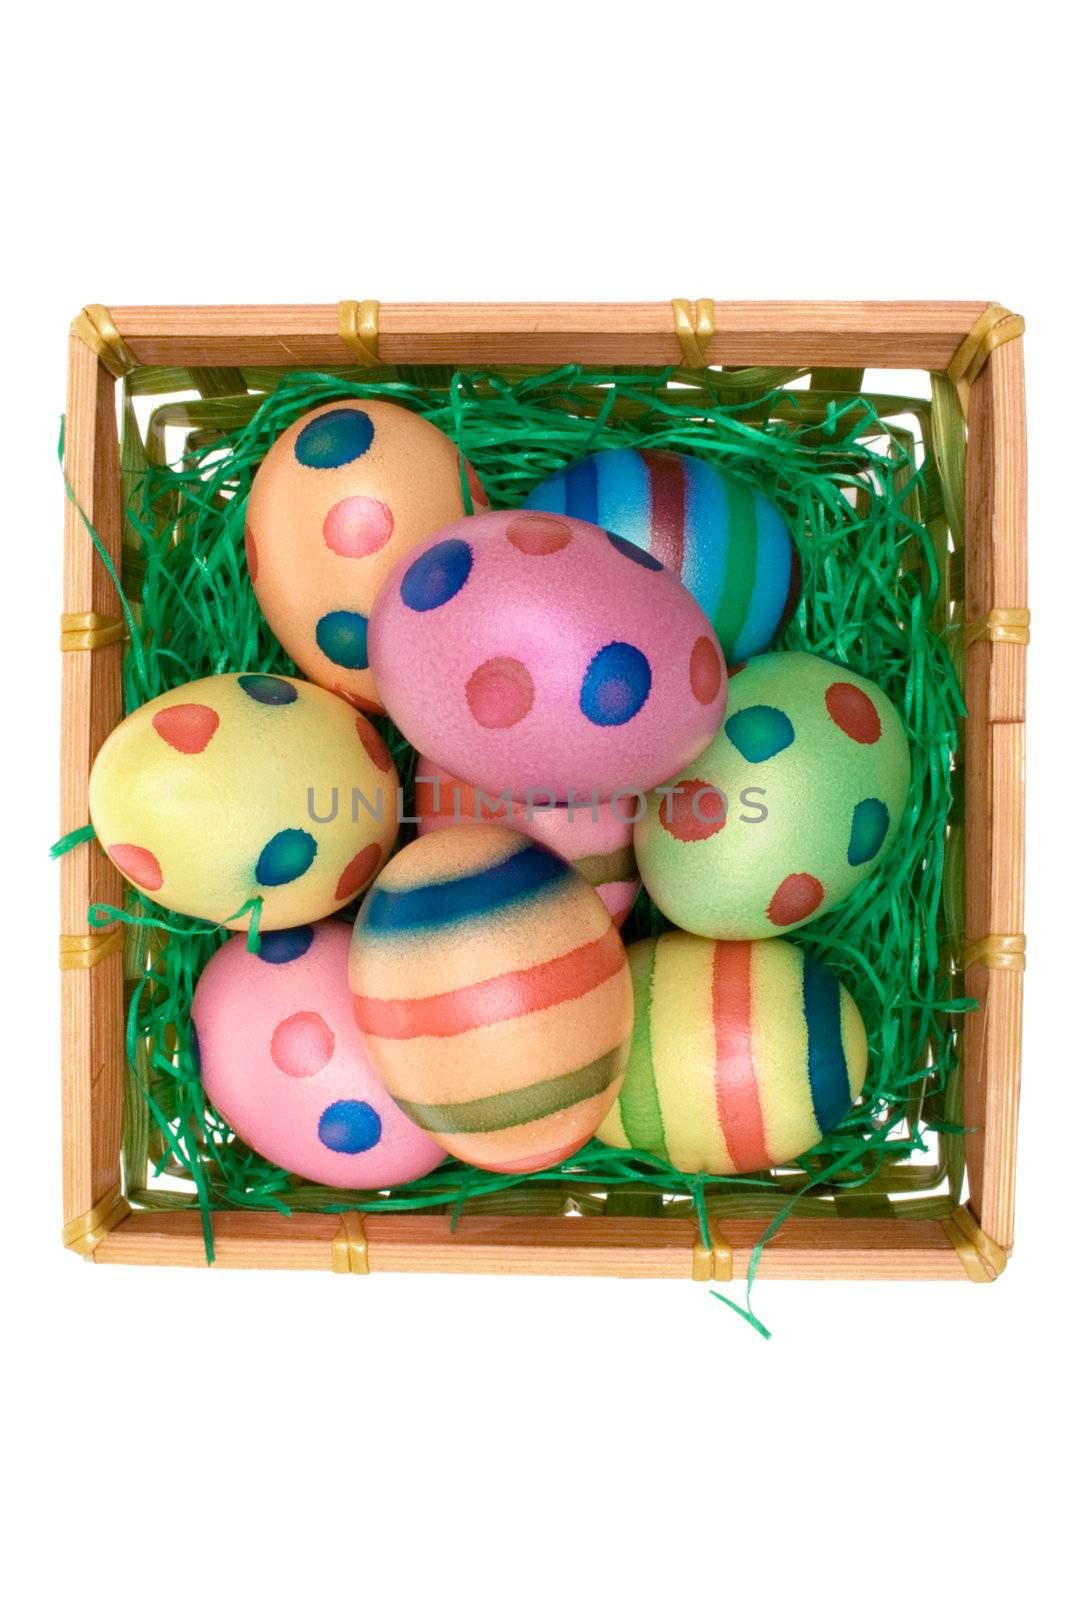 Easter eggs in a wooden basket. Isolated on a white background.